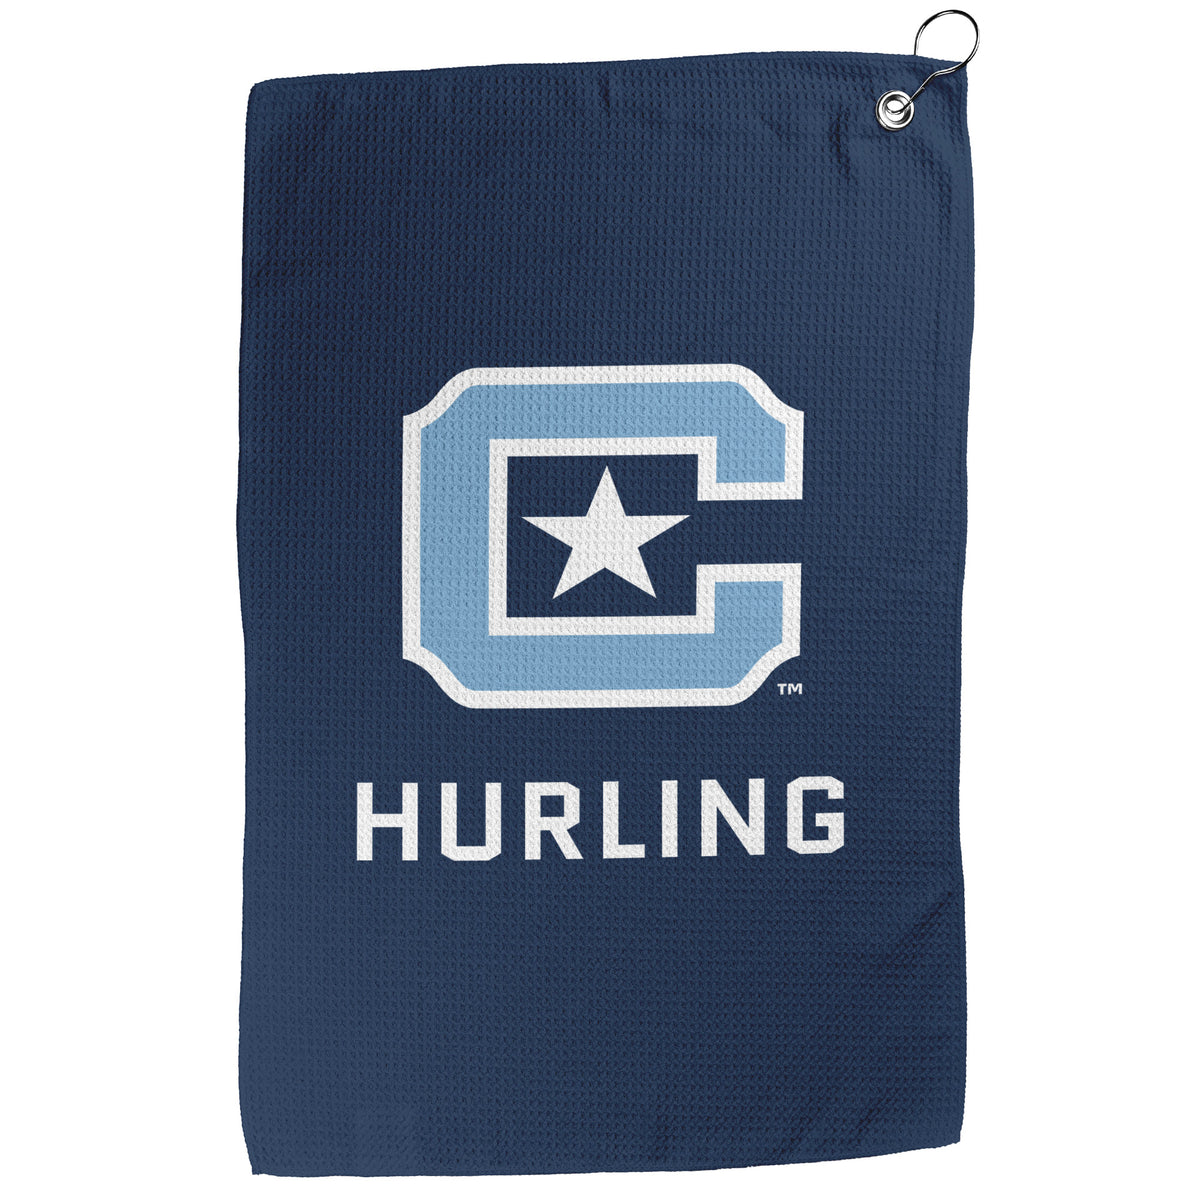 The Citadel, Club Sports Hurling, Double Sided Golf Towel